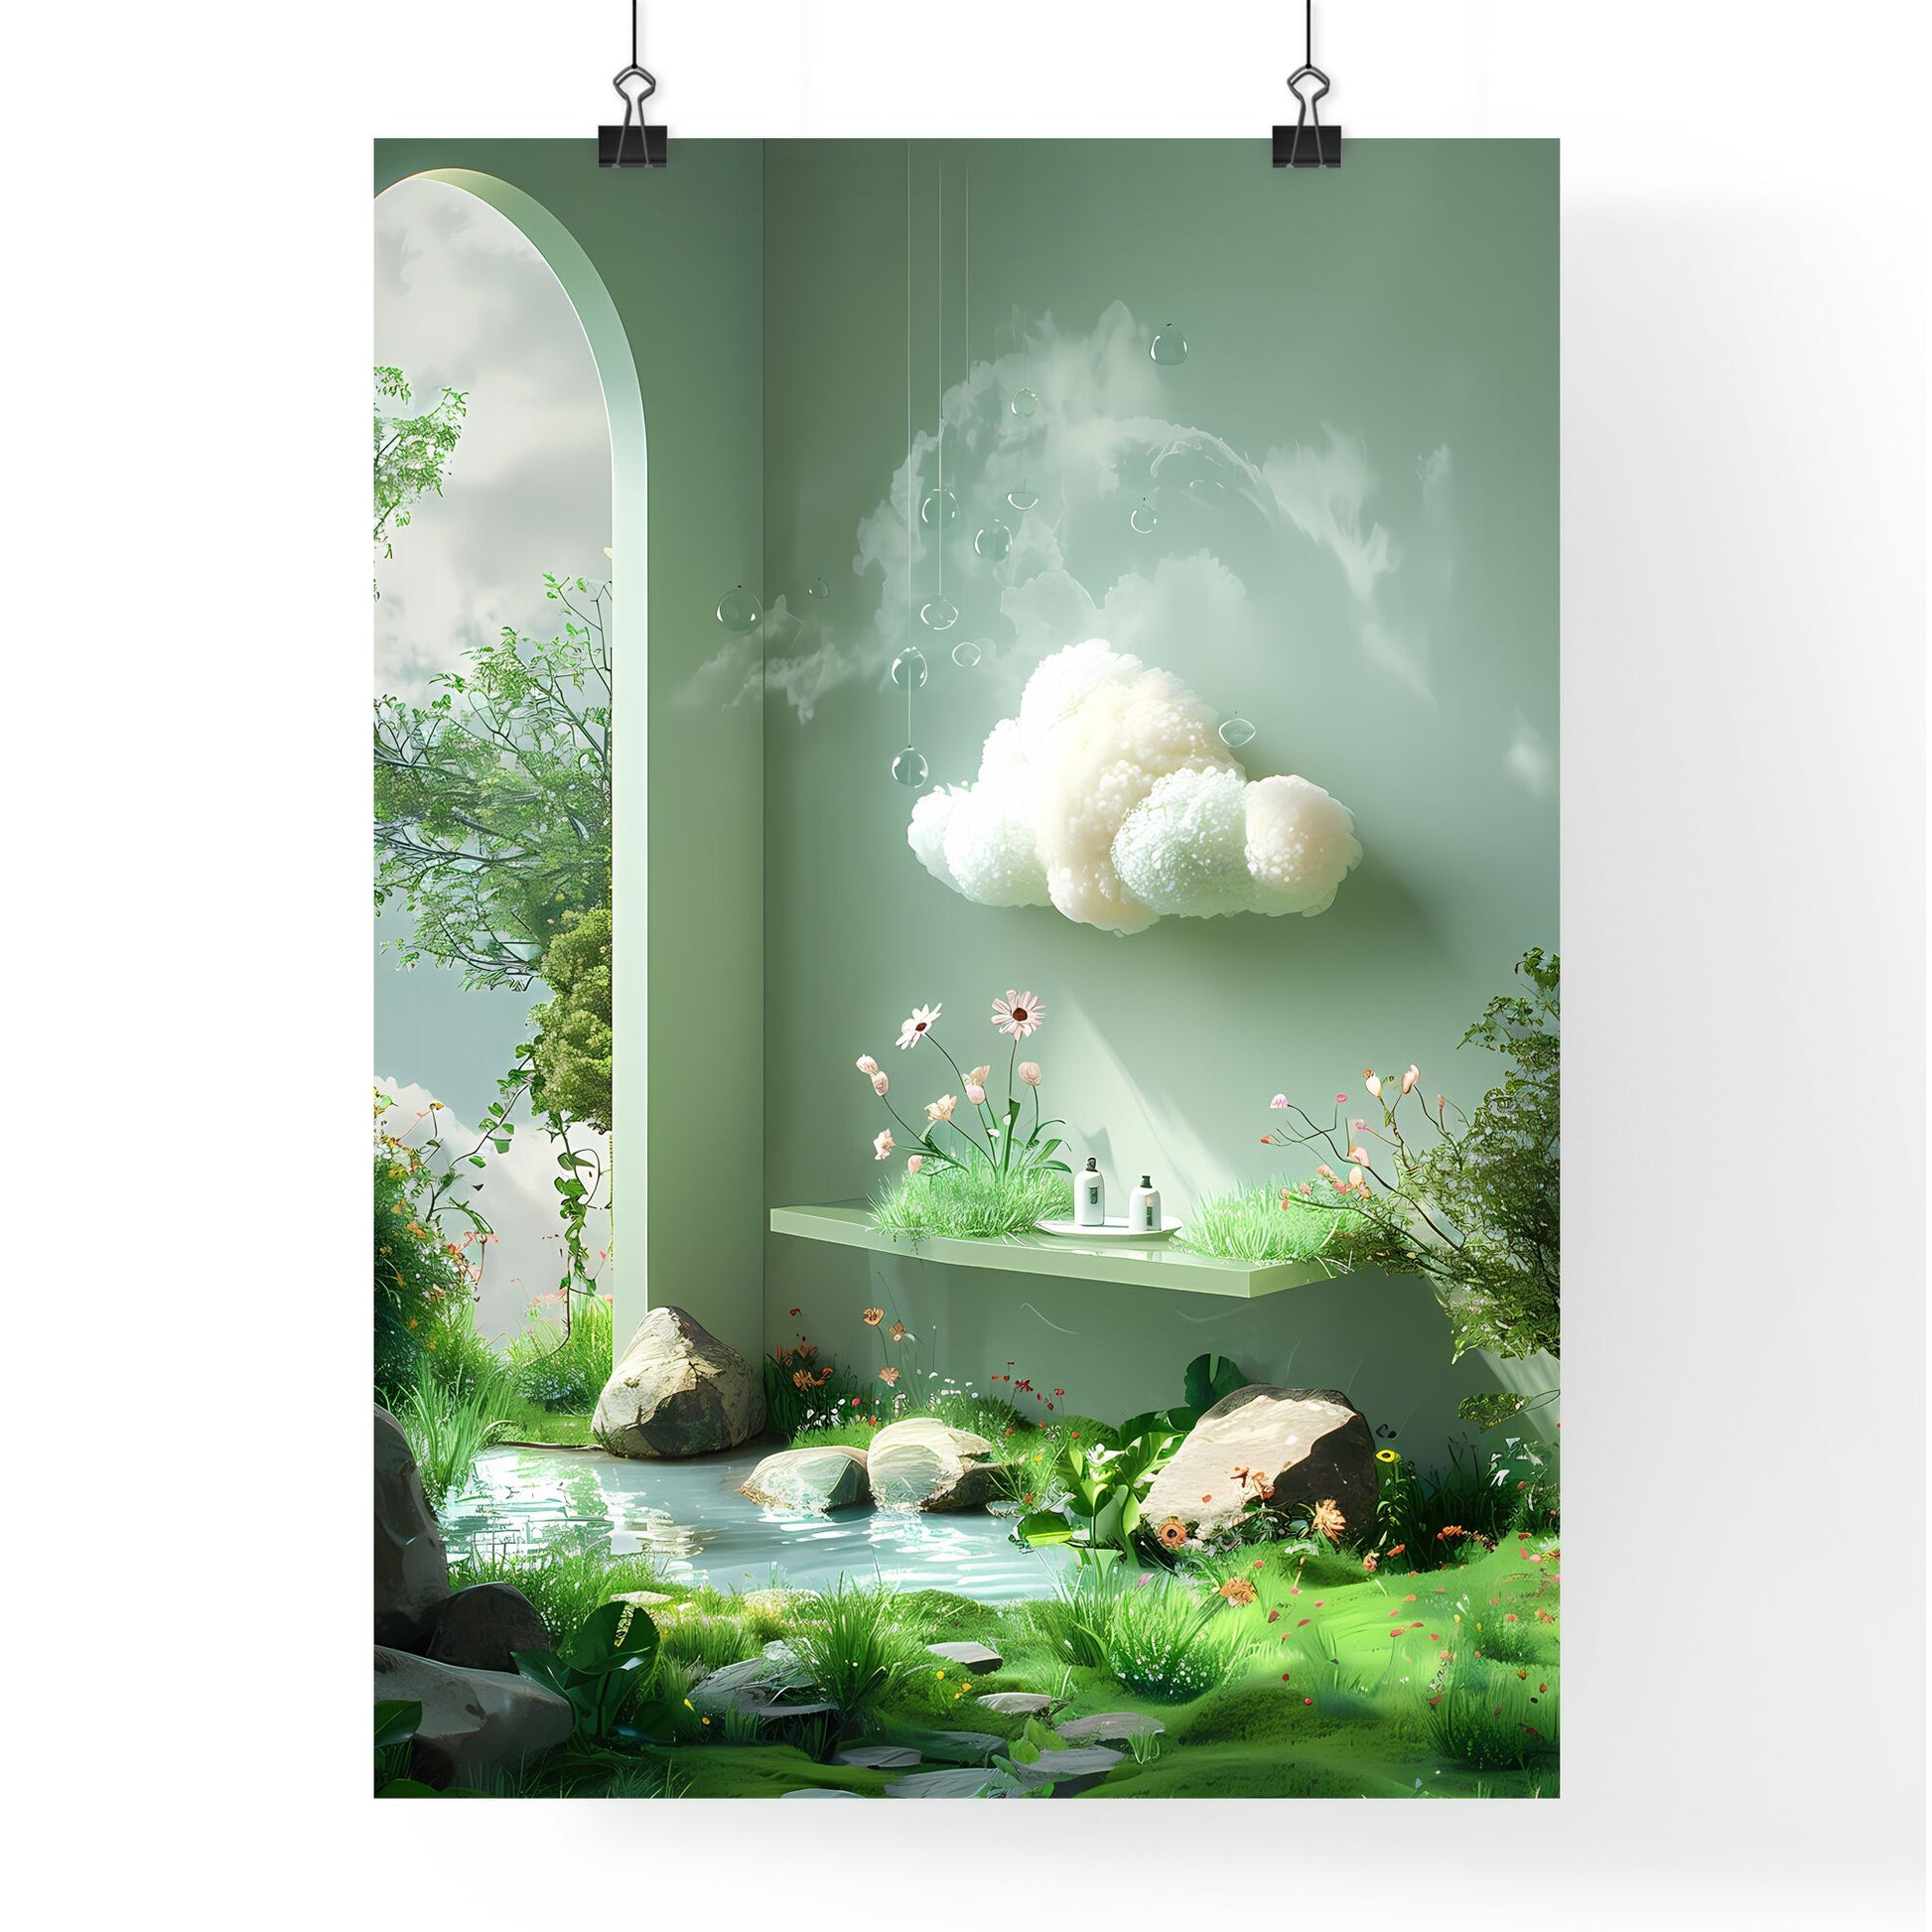 Abstract white cloud-shaped shelf floating in the air with plants, flowers, pond, window, light green wall, rocks, and water Default Title